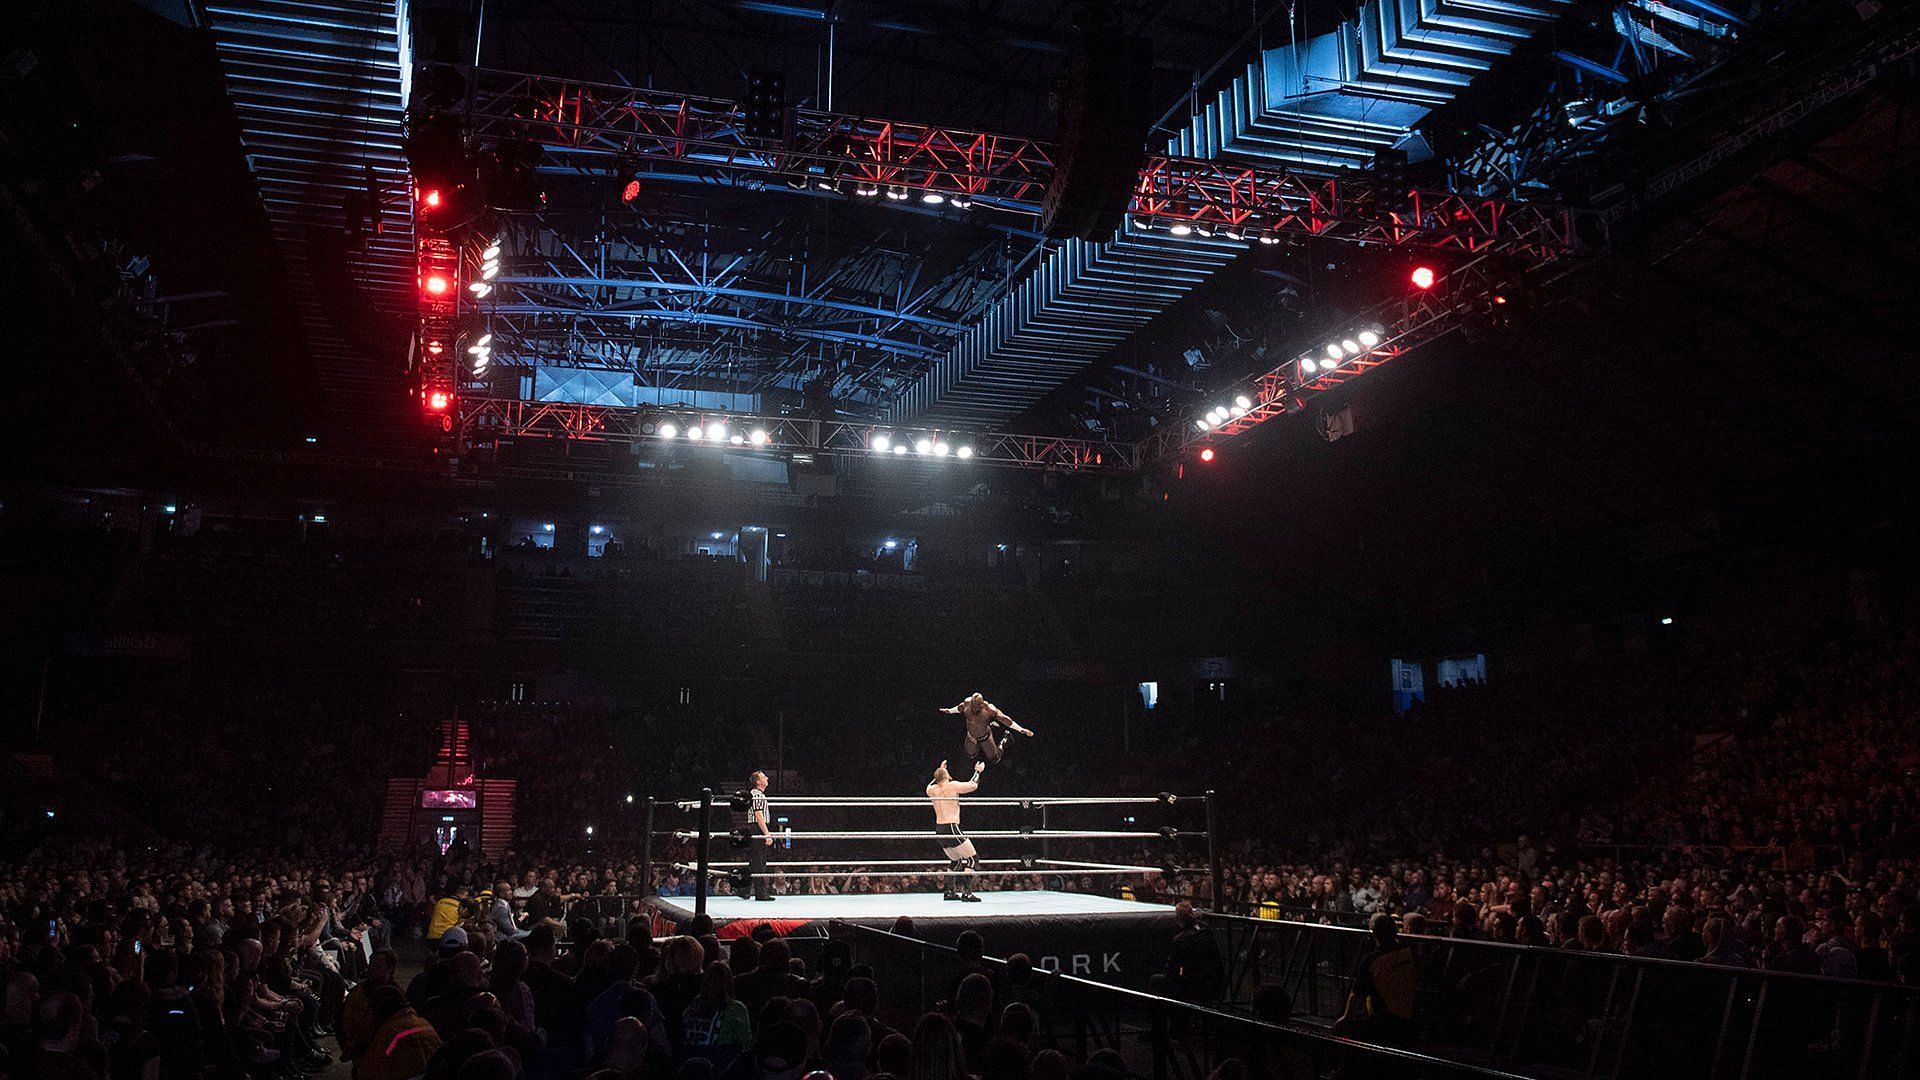 A packed crowd watches the WWE live event in Newcastle, England